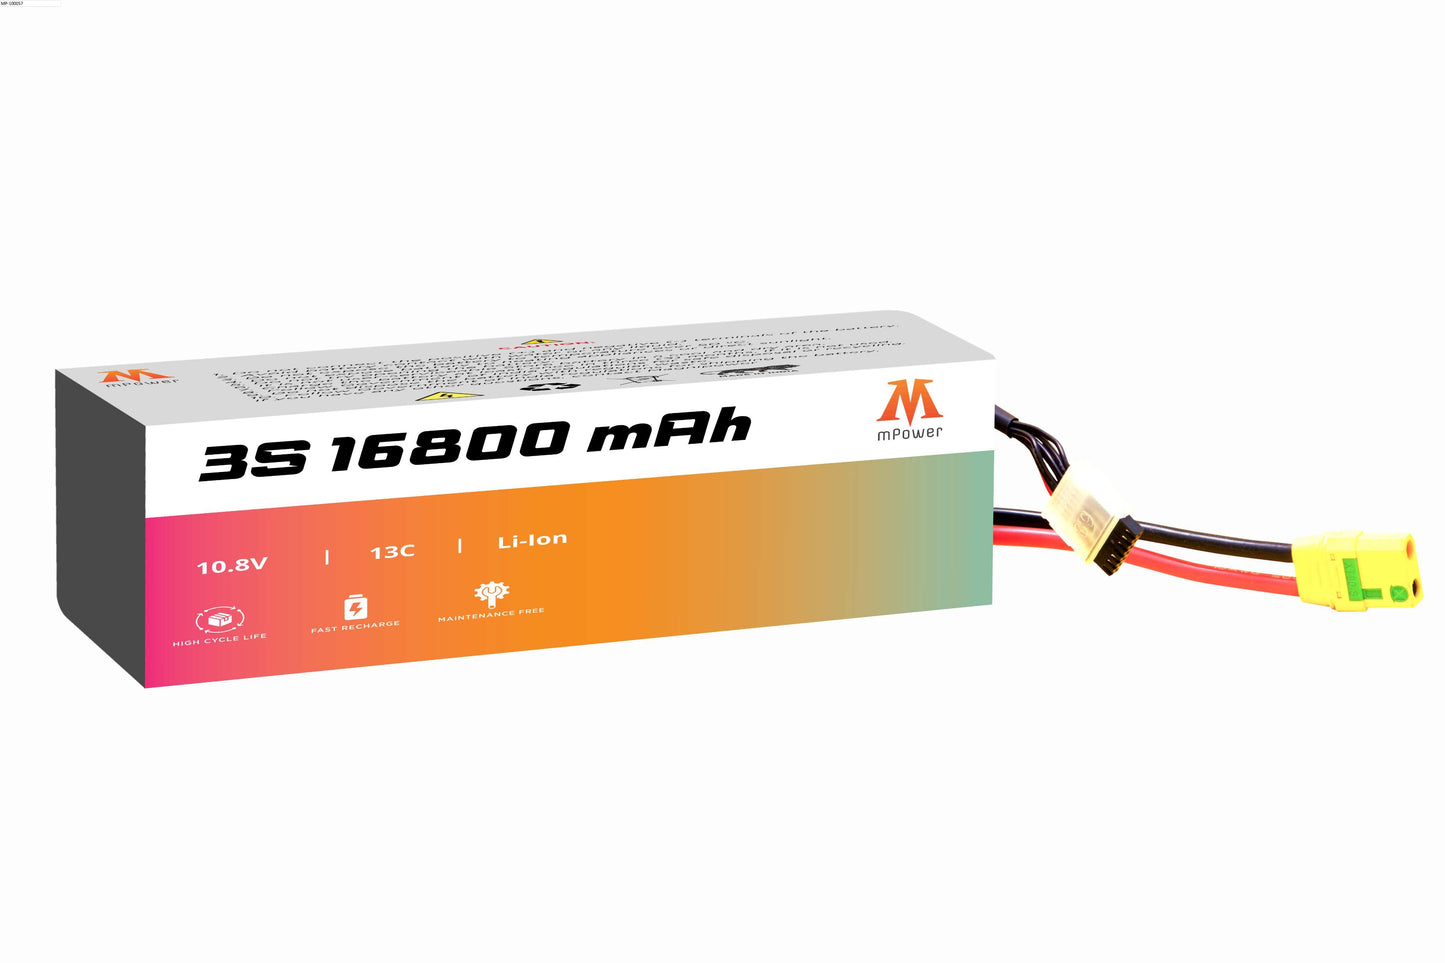 mPower 3S 16800mAh 13C Lithium-Ion Battery for Surveillance Drones